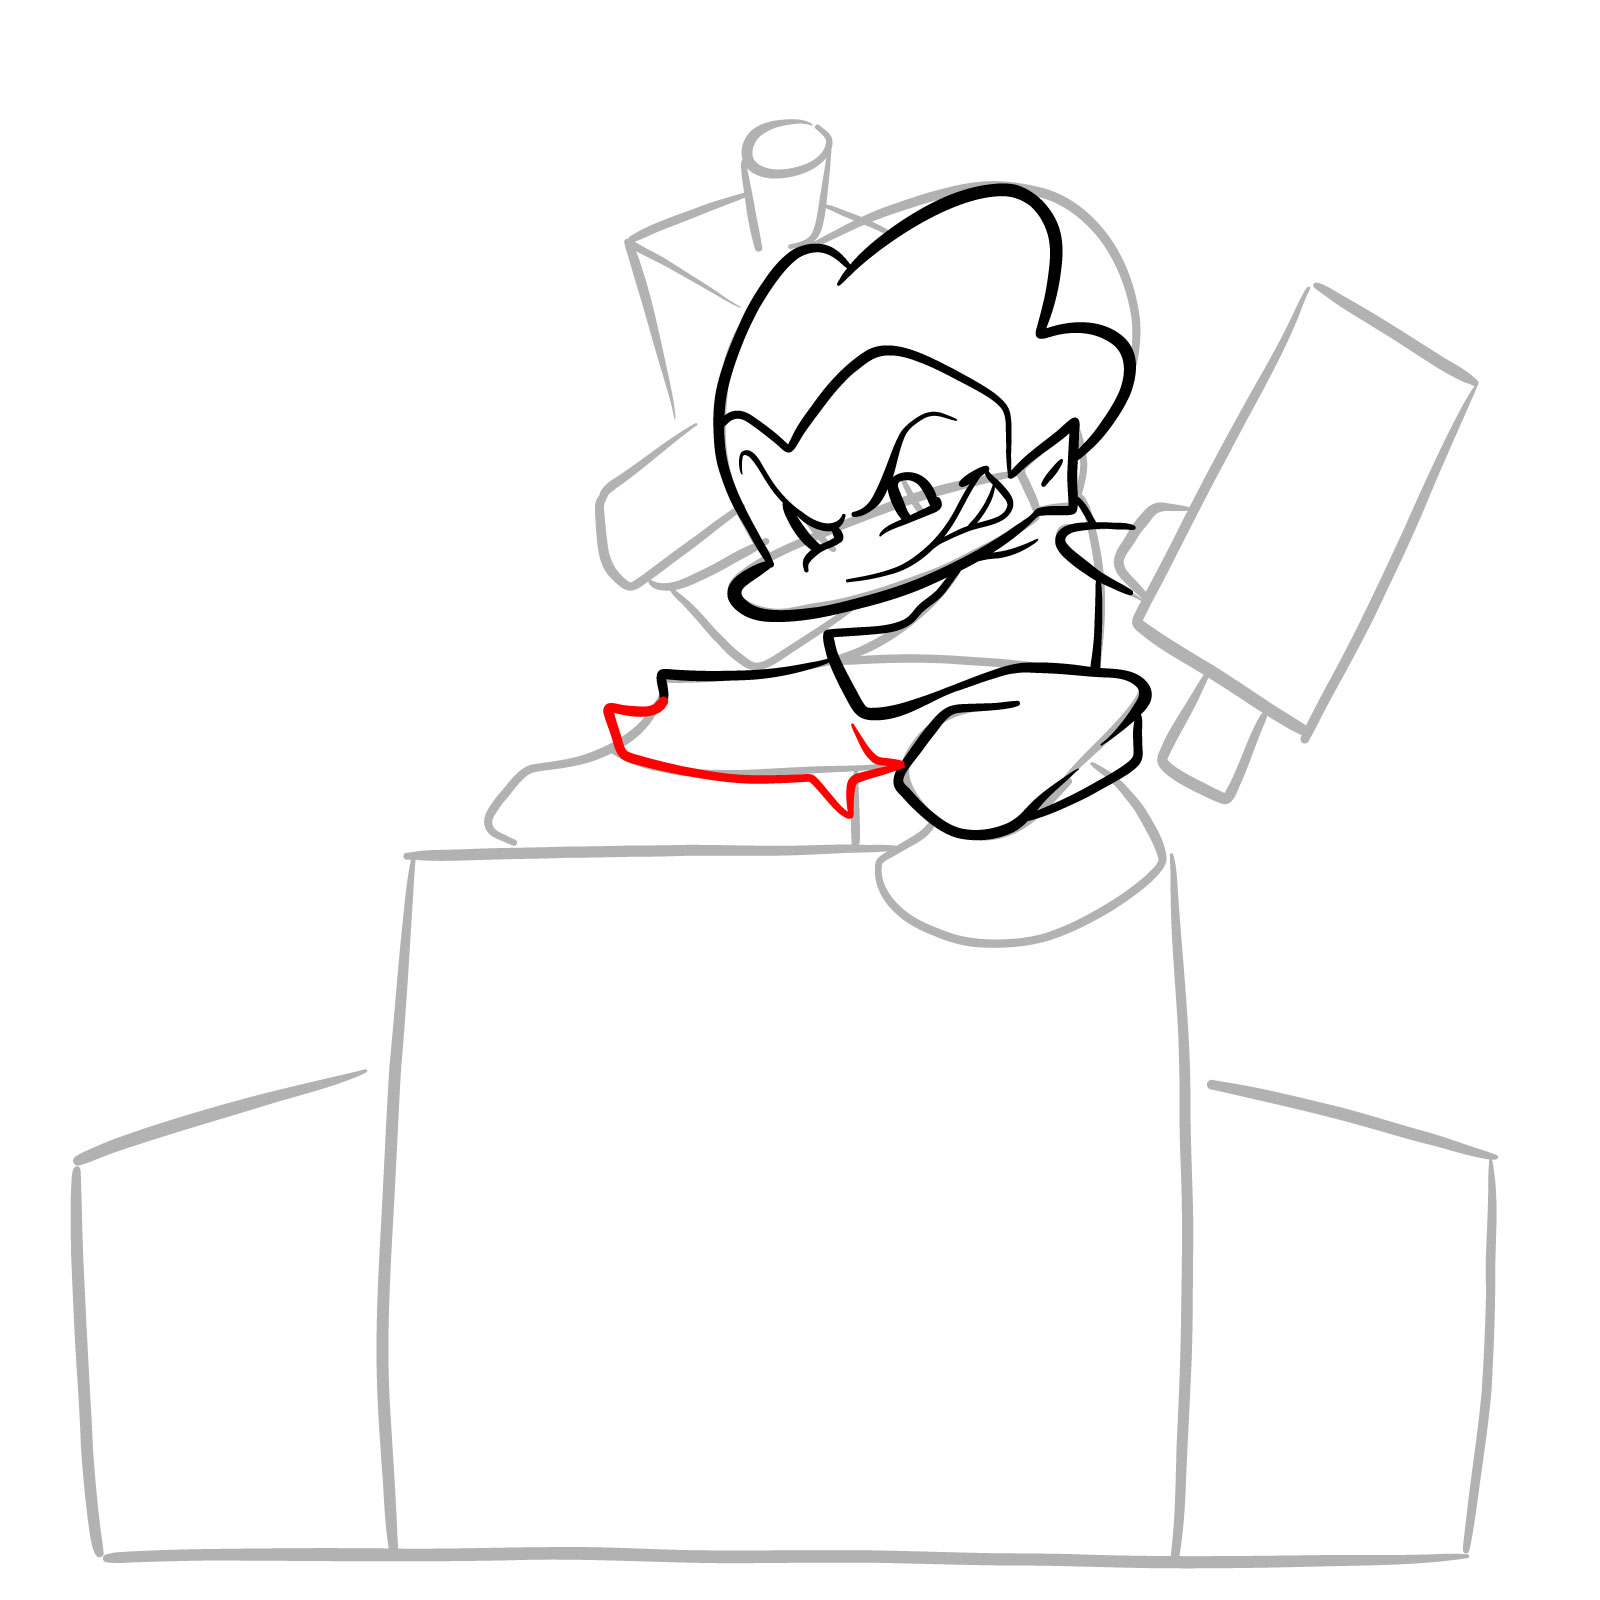 How to draw Pico on the speakers - step 13